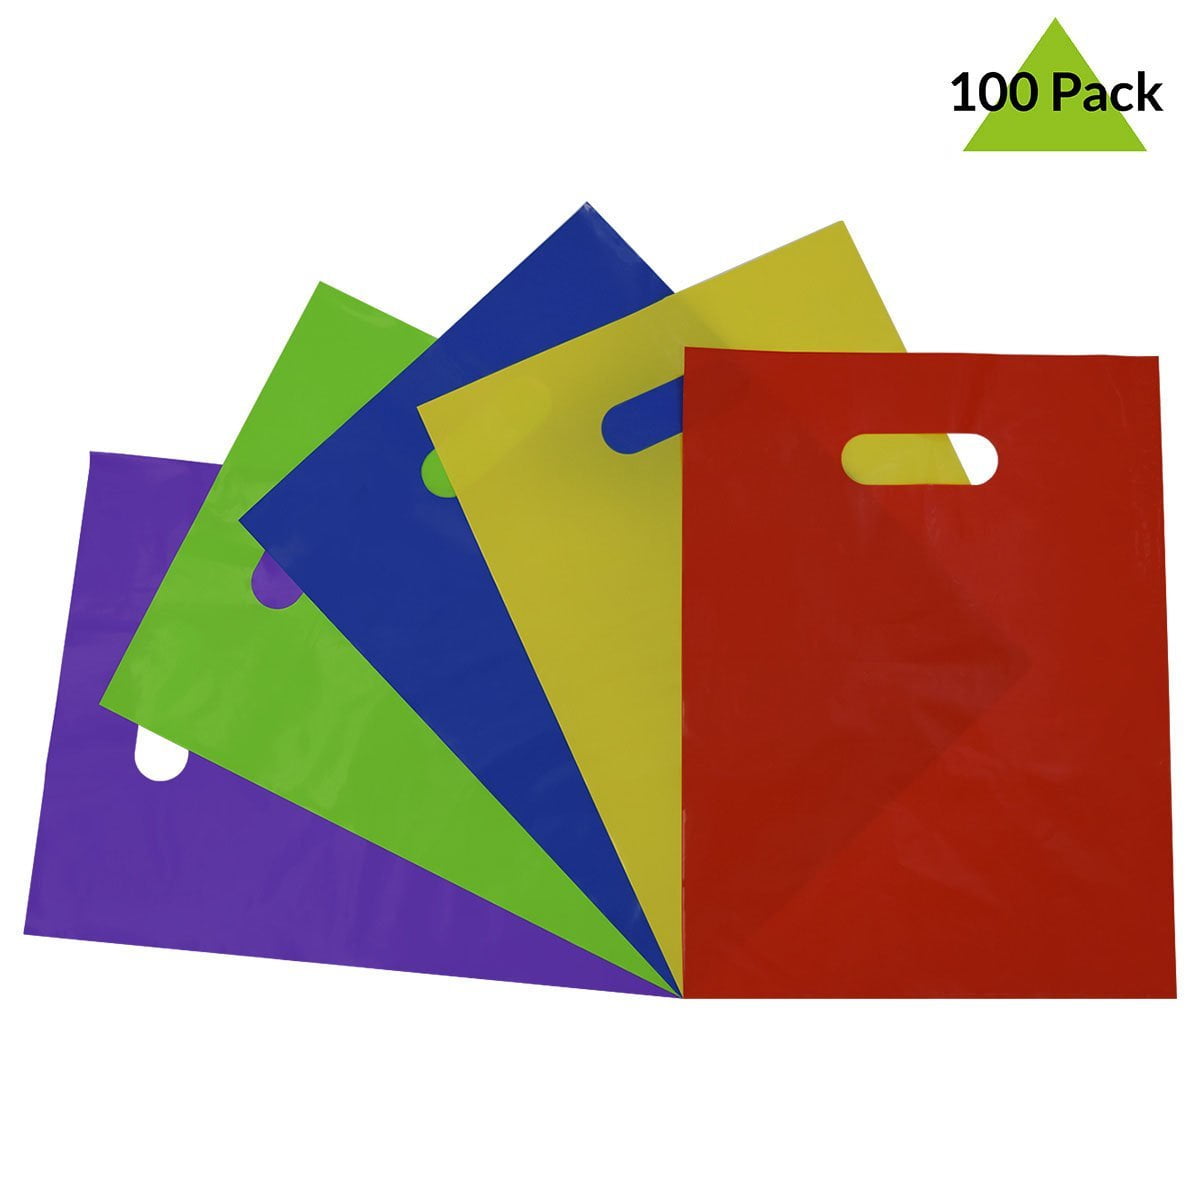 Details about   200 Bags 100 10x13 Colorful Hearts 100 10x13 Let's Go Shopping Designer Poly